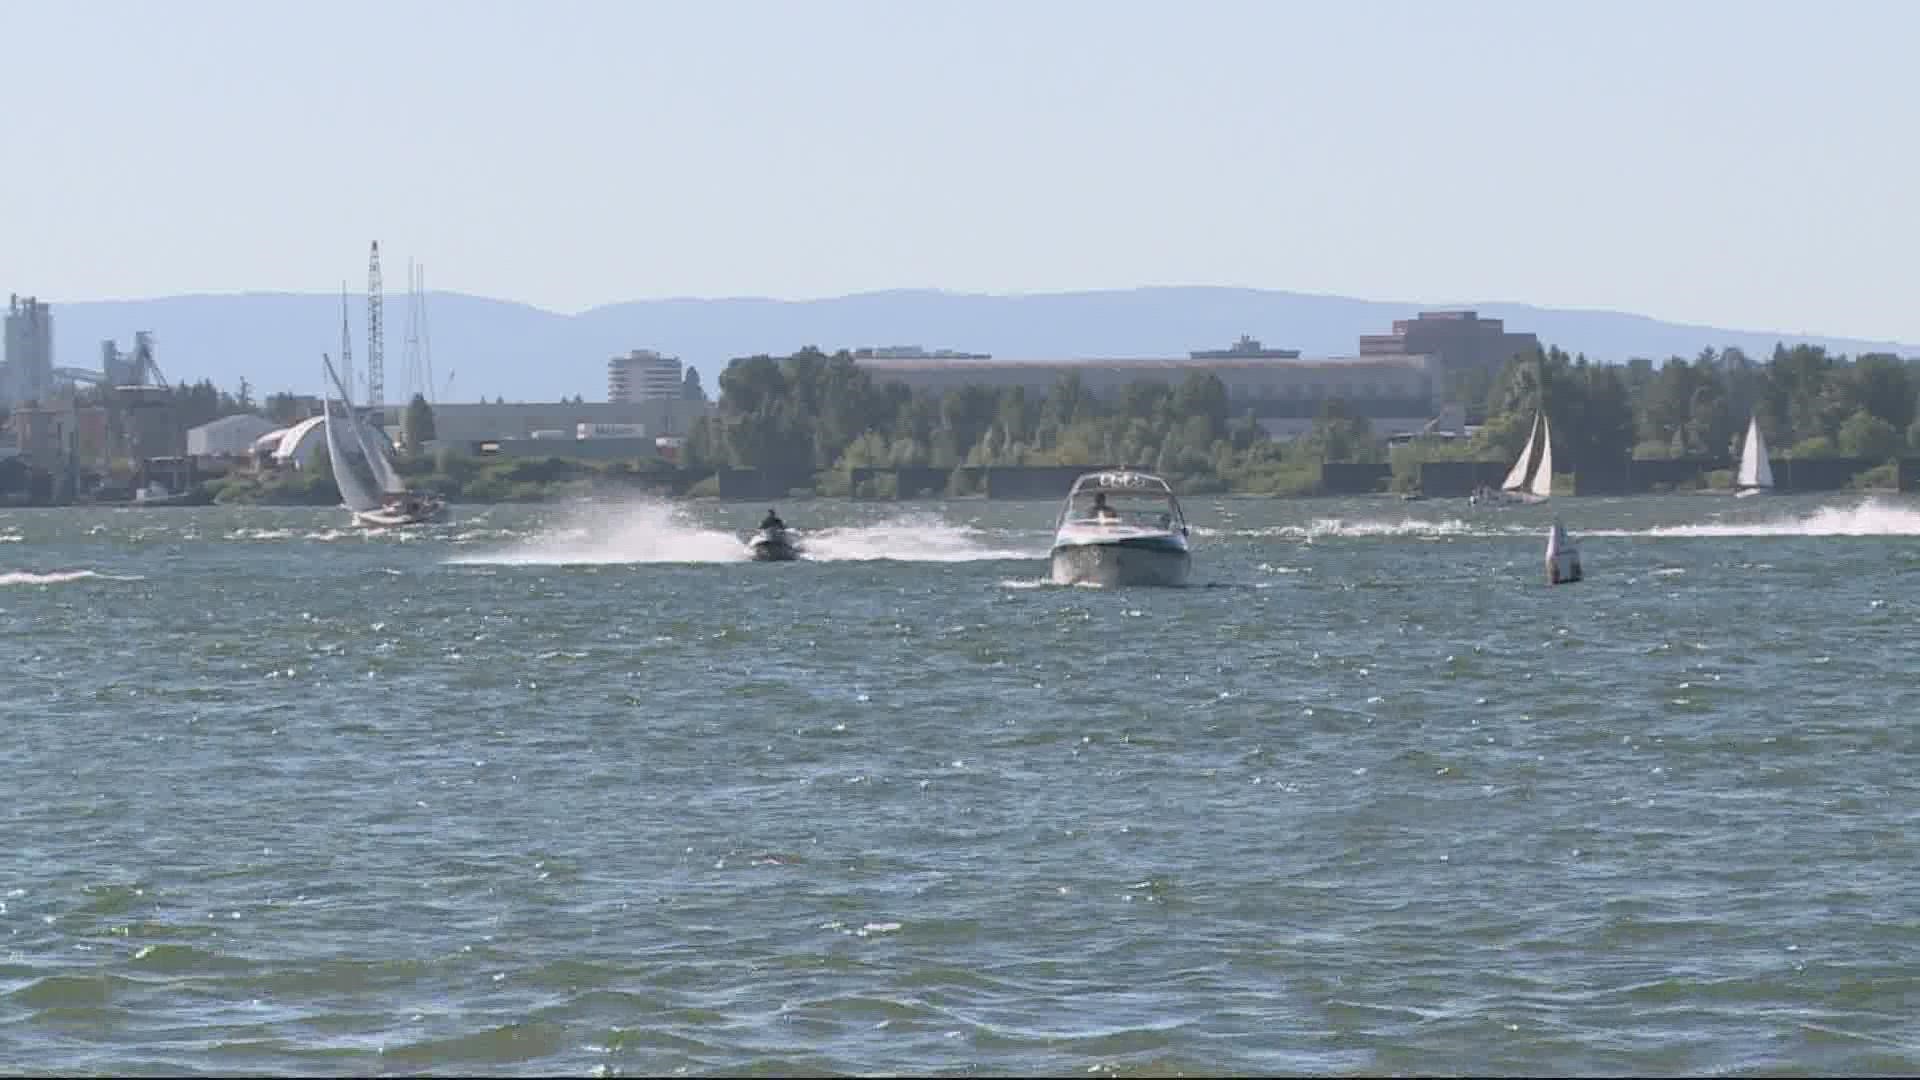 Boating incidents and drownings have been unfortunately common so far this summer, when the extreme heat can belie shockingly cold water temperatures.